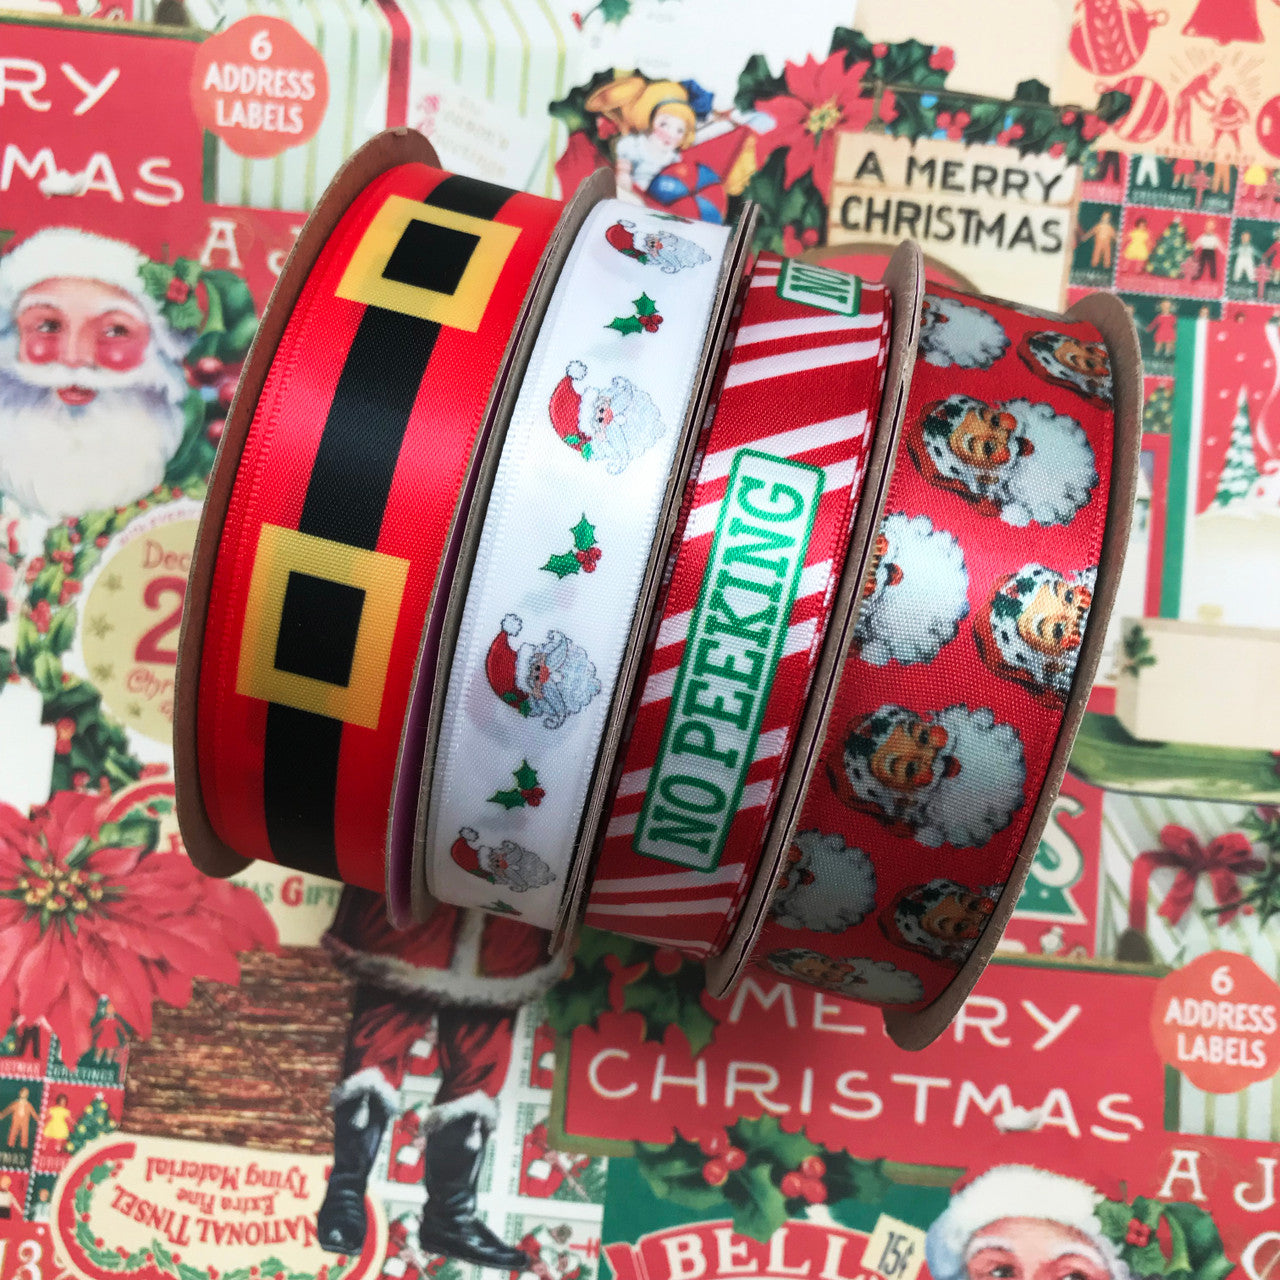 Vintage Santa Claus Ribbon on a red background  printed on 7/8" White Single face satin and grosgrain